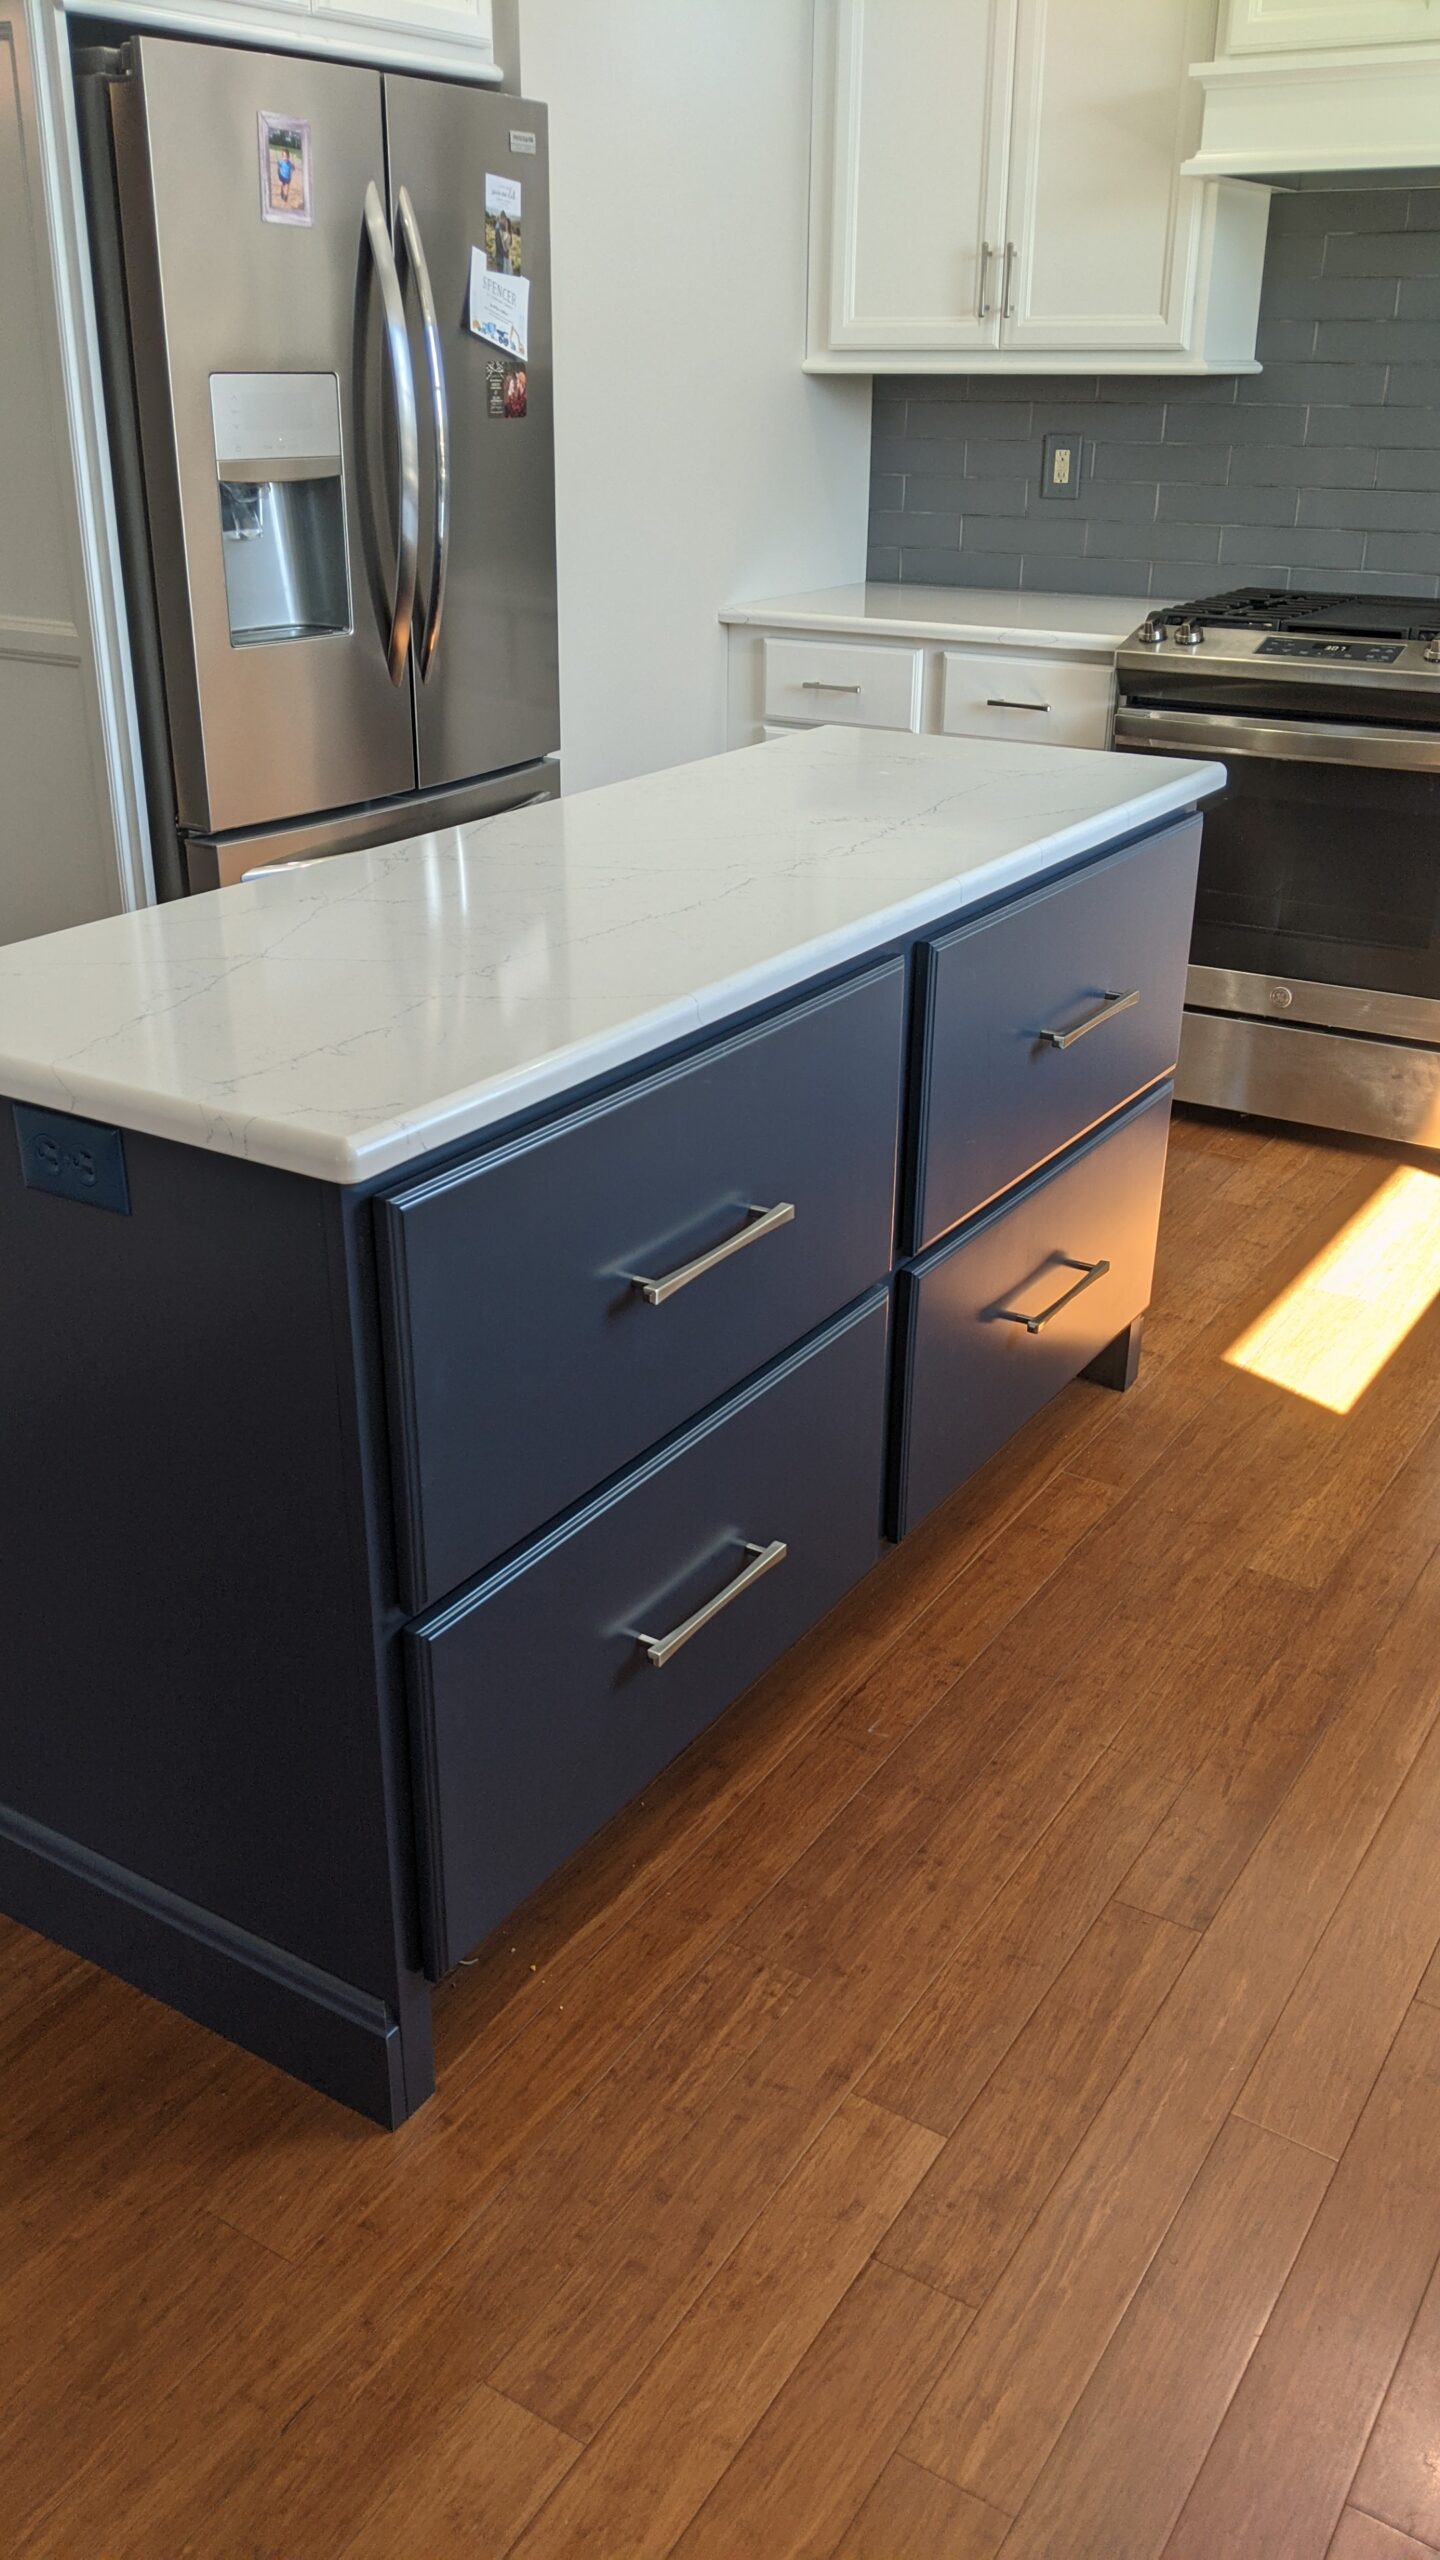 The new kitchen island in the accent blue color.